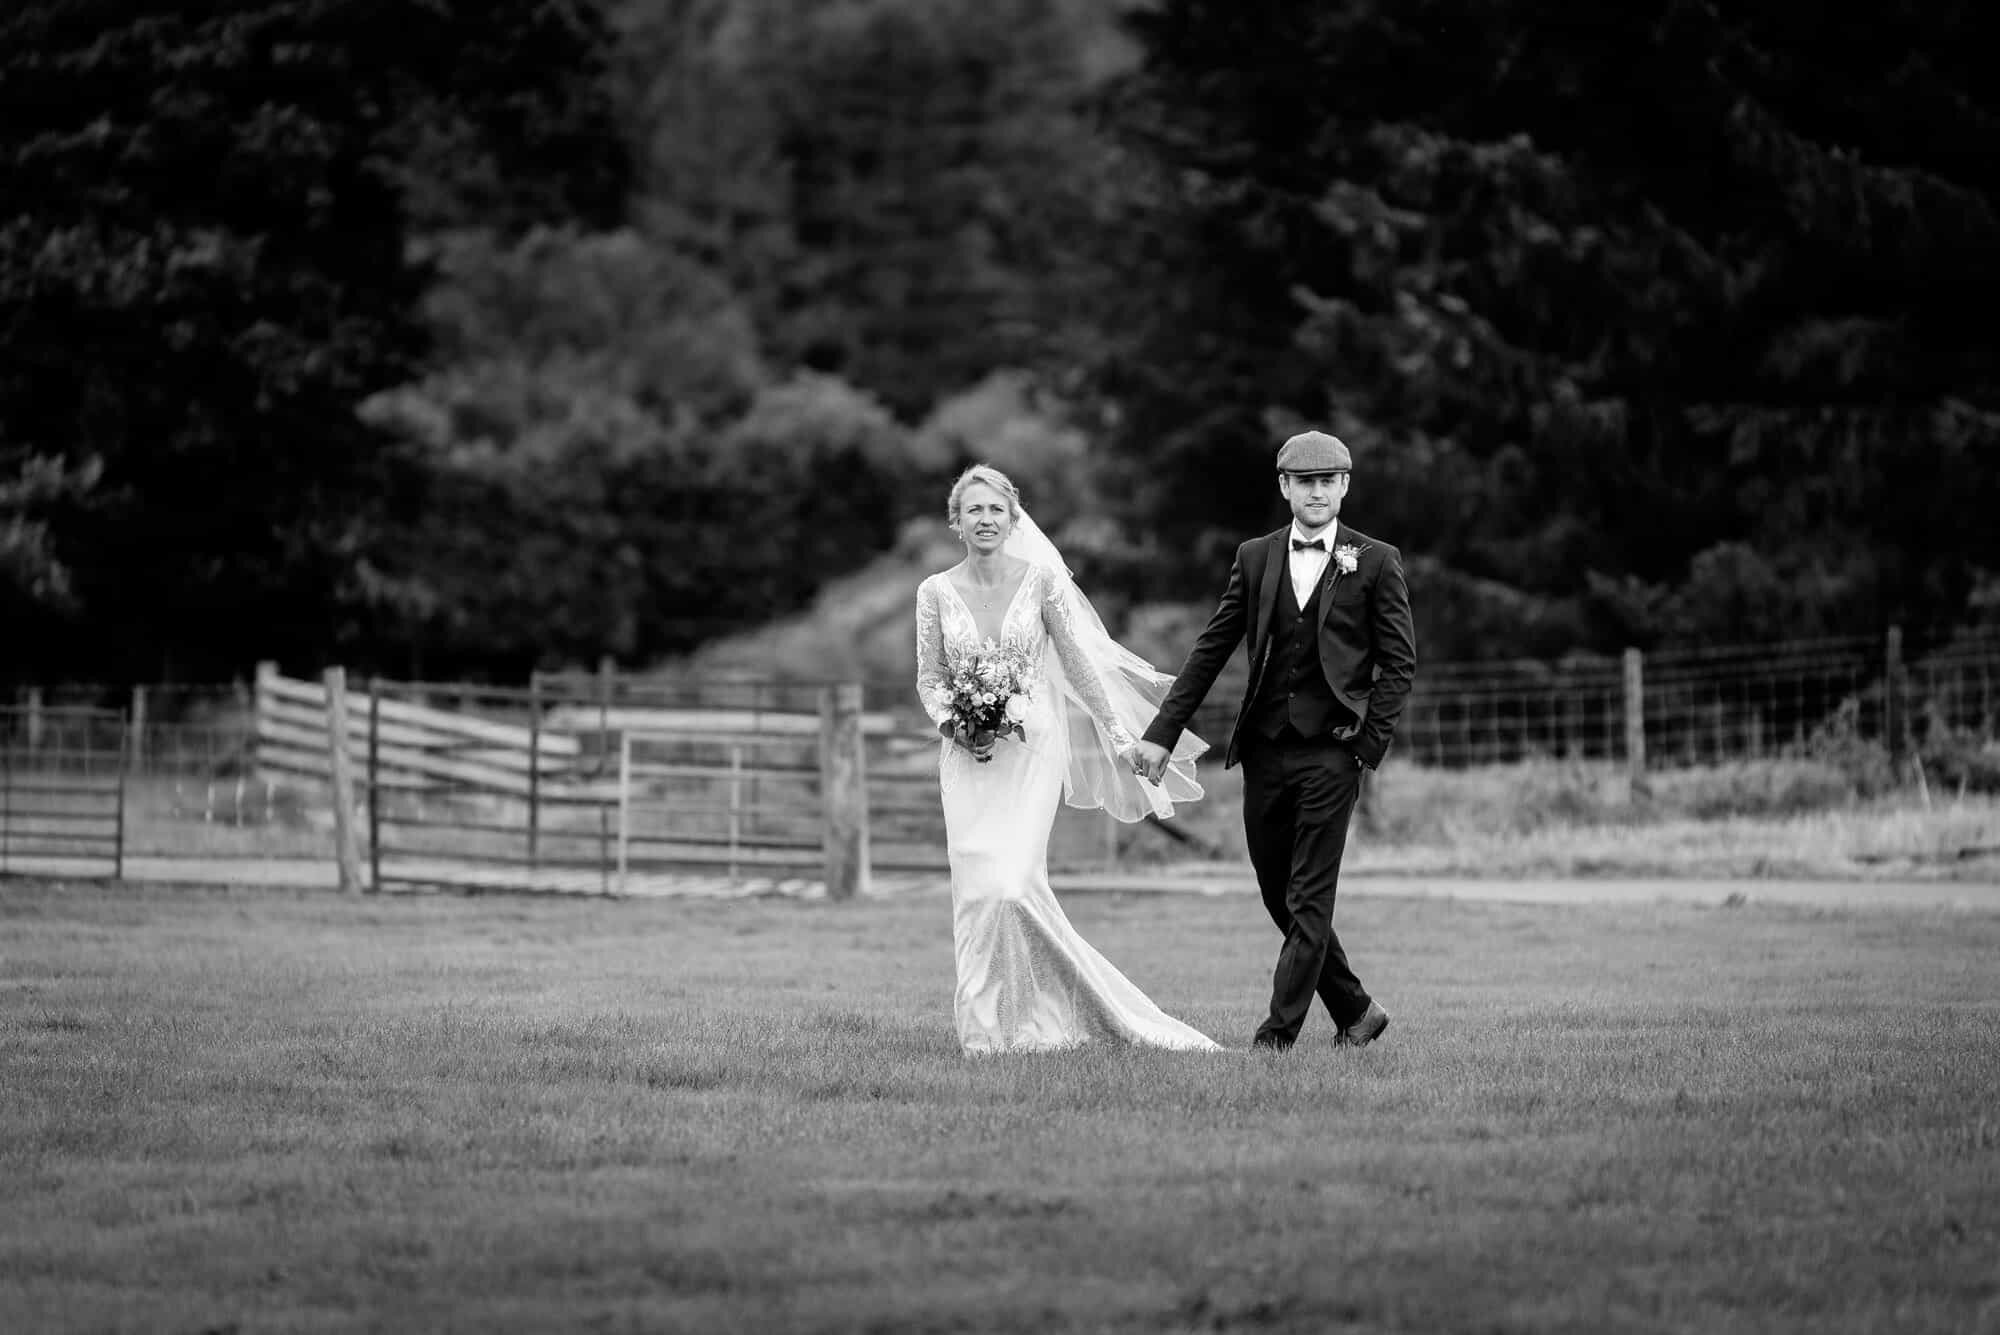 Newly weds walking naturally togetherBride and groom taking a walk